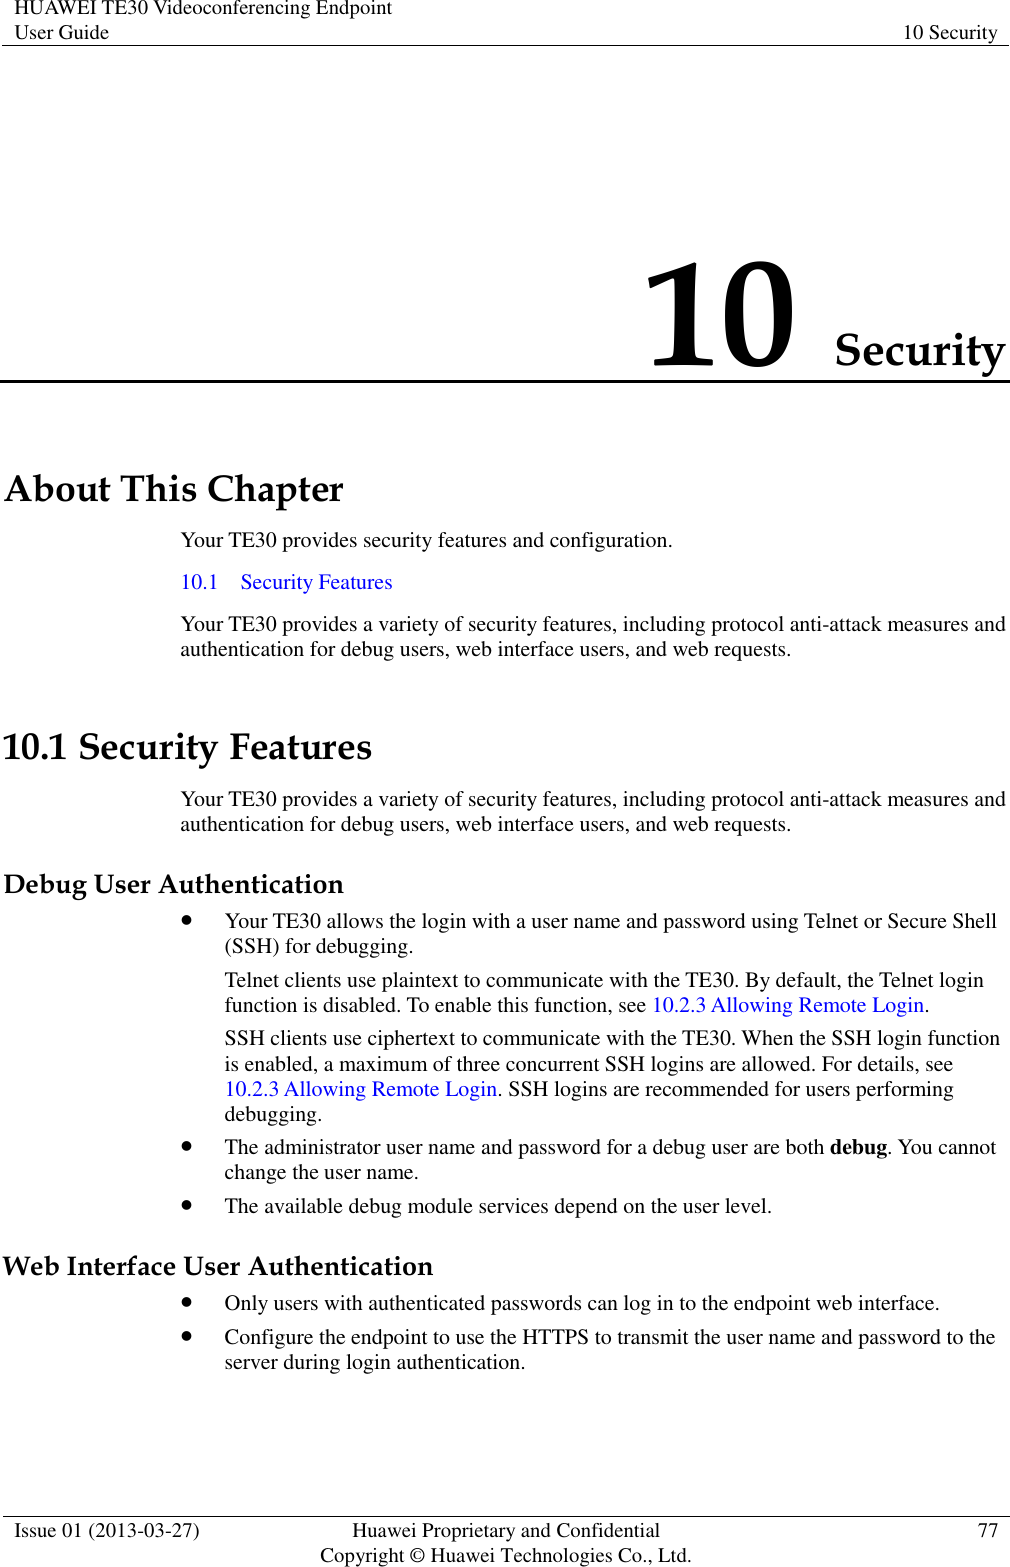 HUAWEI TE30 Videoconferencing Endpoint User Guide 10 Security  Issue 01 (2013-03-27) Huawei Proprietary and Confidential                                     Copyright © Huawei Technologies Co., Ltd. 77  10 Security About This Chapter Your TE30 provides security features and configuration. 10.1    Security Features Your TE30 provides a variety of security features, including protocol anti-attack measures and authentication for debug users, web interface users, and web requests. 10.1 Security Features Your TE30 provides a variety of security features, including protocol anti-attack measures and authentication for debug users, web interface users, and web requests. Debug User Authentication  Your TE30 allows the login with a user name and password using Telnet or Secure Shell (SSH) for debugging. Telnet clients use plaintext to communicate with the TE30. By default, the Telnet login function is disabled. To enable this function, see 10.2.3 Allowing Remote Login.   SSH clients use ciphertext to communicate with the TE30. When the SSH login function is enabled, a maximum of three concurrent SSH logins are allowed. For details, see 10.2.3 Allowing Remote Login. SSH logins are recommended for users performing debugging.  The administrator user name and password for a debug user are both debug. You cannot change the user name.  The available debug module services depend on the user level. Web Interface User Authentication  Only users with authenticated passwords can log in to the endpoint web interface.  Configure the endpoint to use the HTTPS to transmit the user name and password to the server during login authentication. 